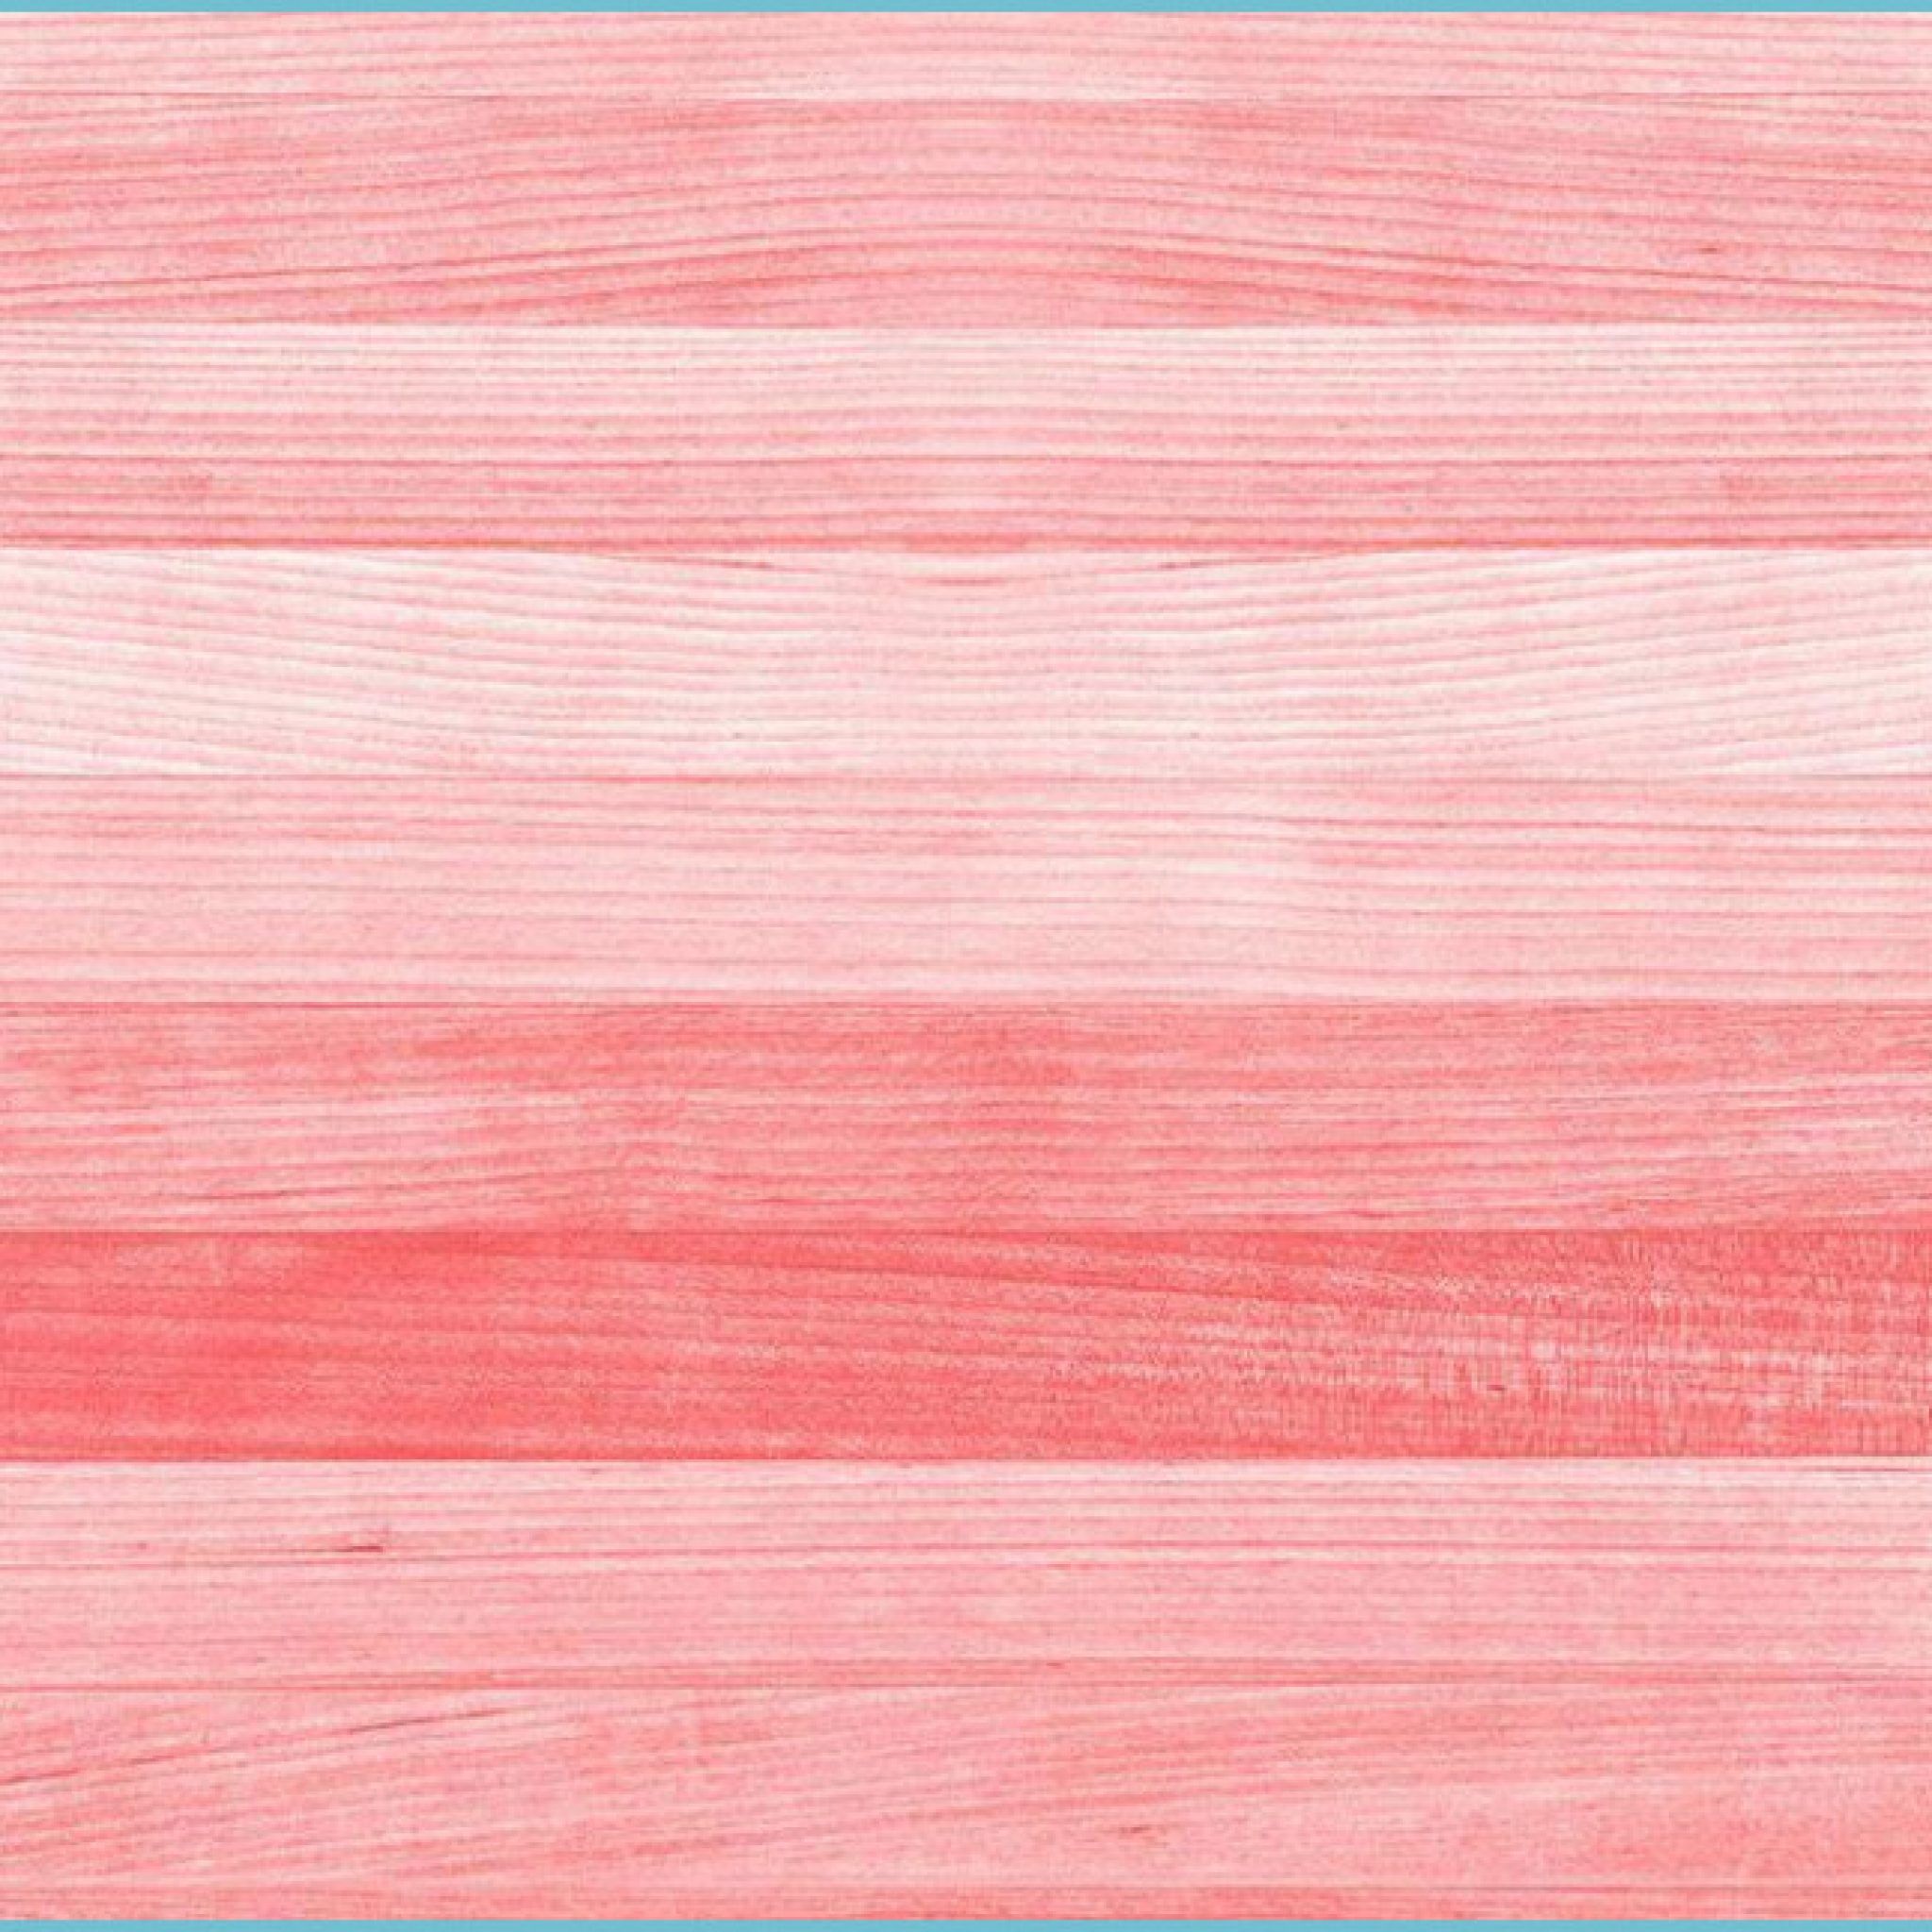 A painting of a pink and blue wood texture - Salmon